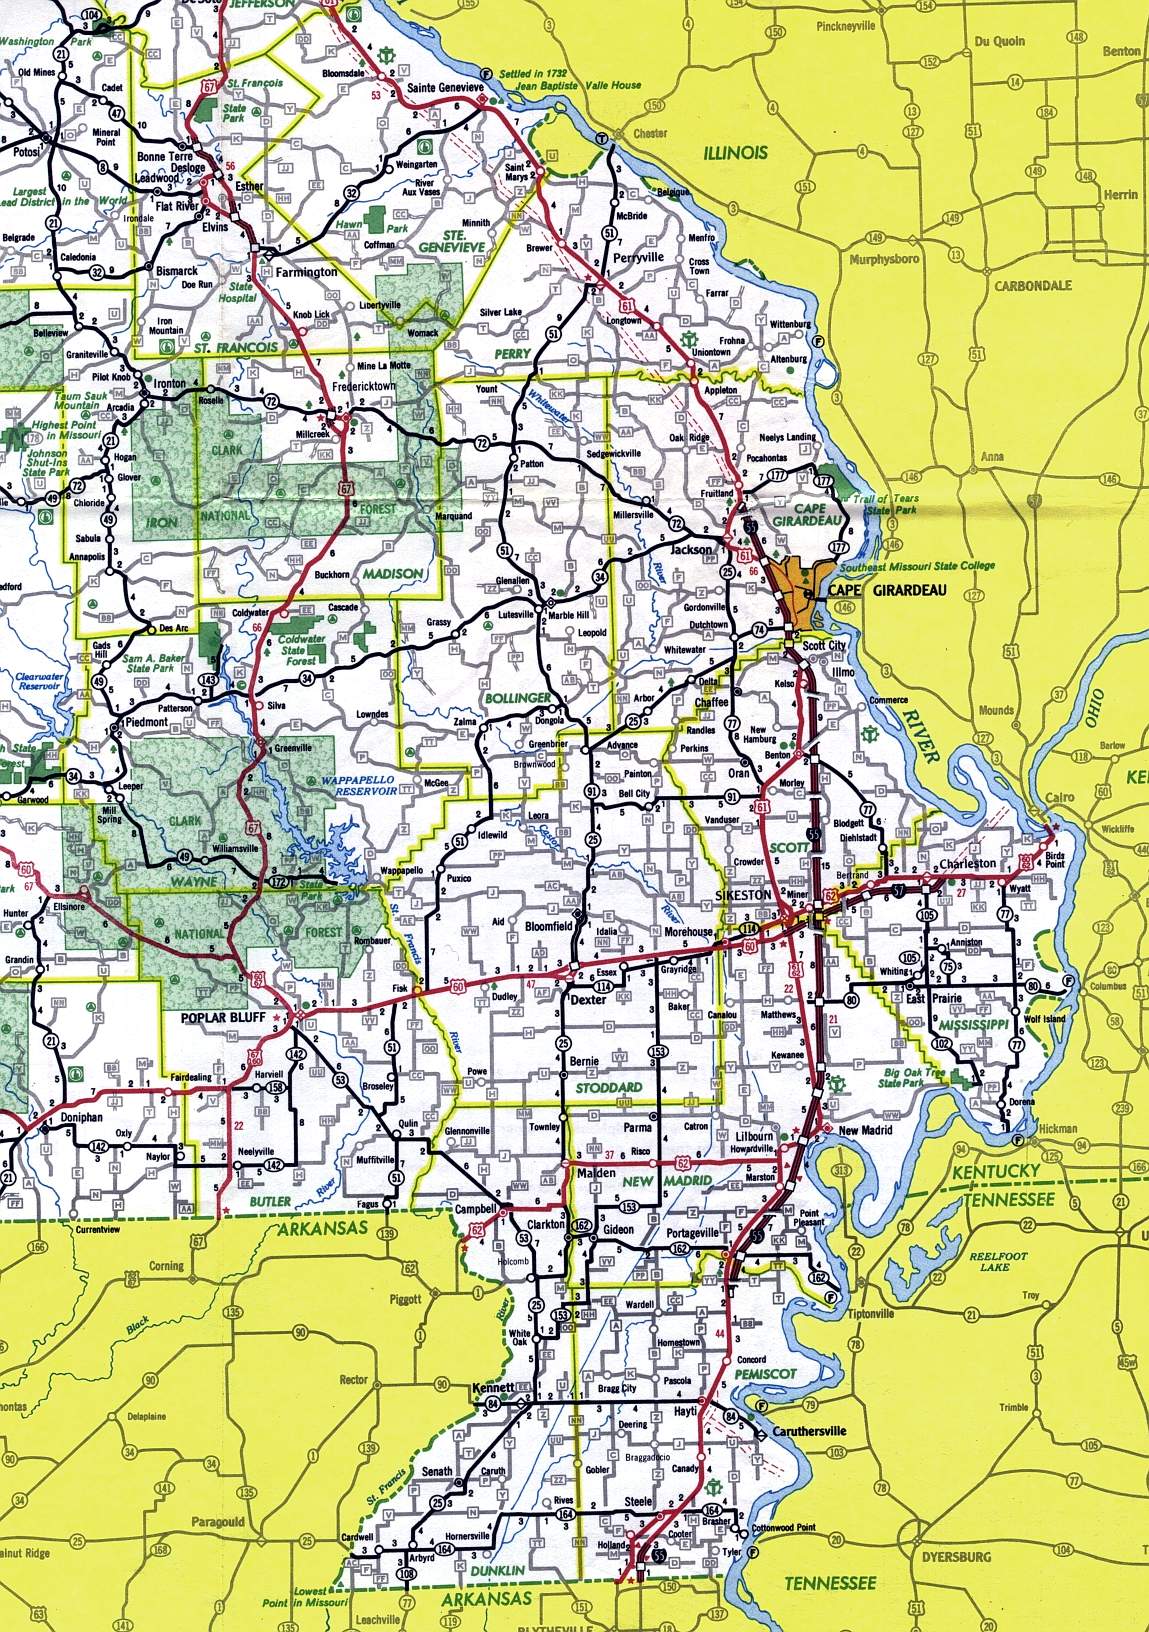 Bootheel section of Missouri from 1969 official highway map